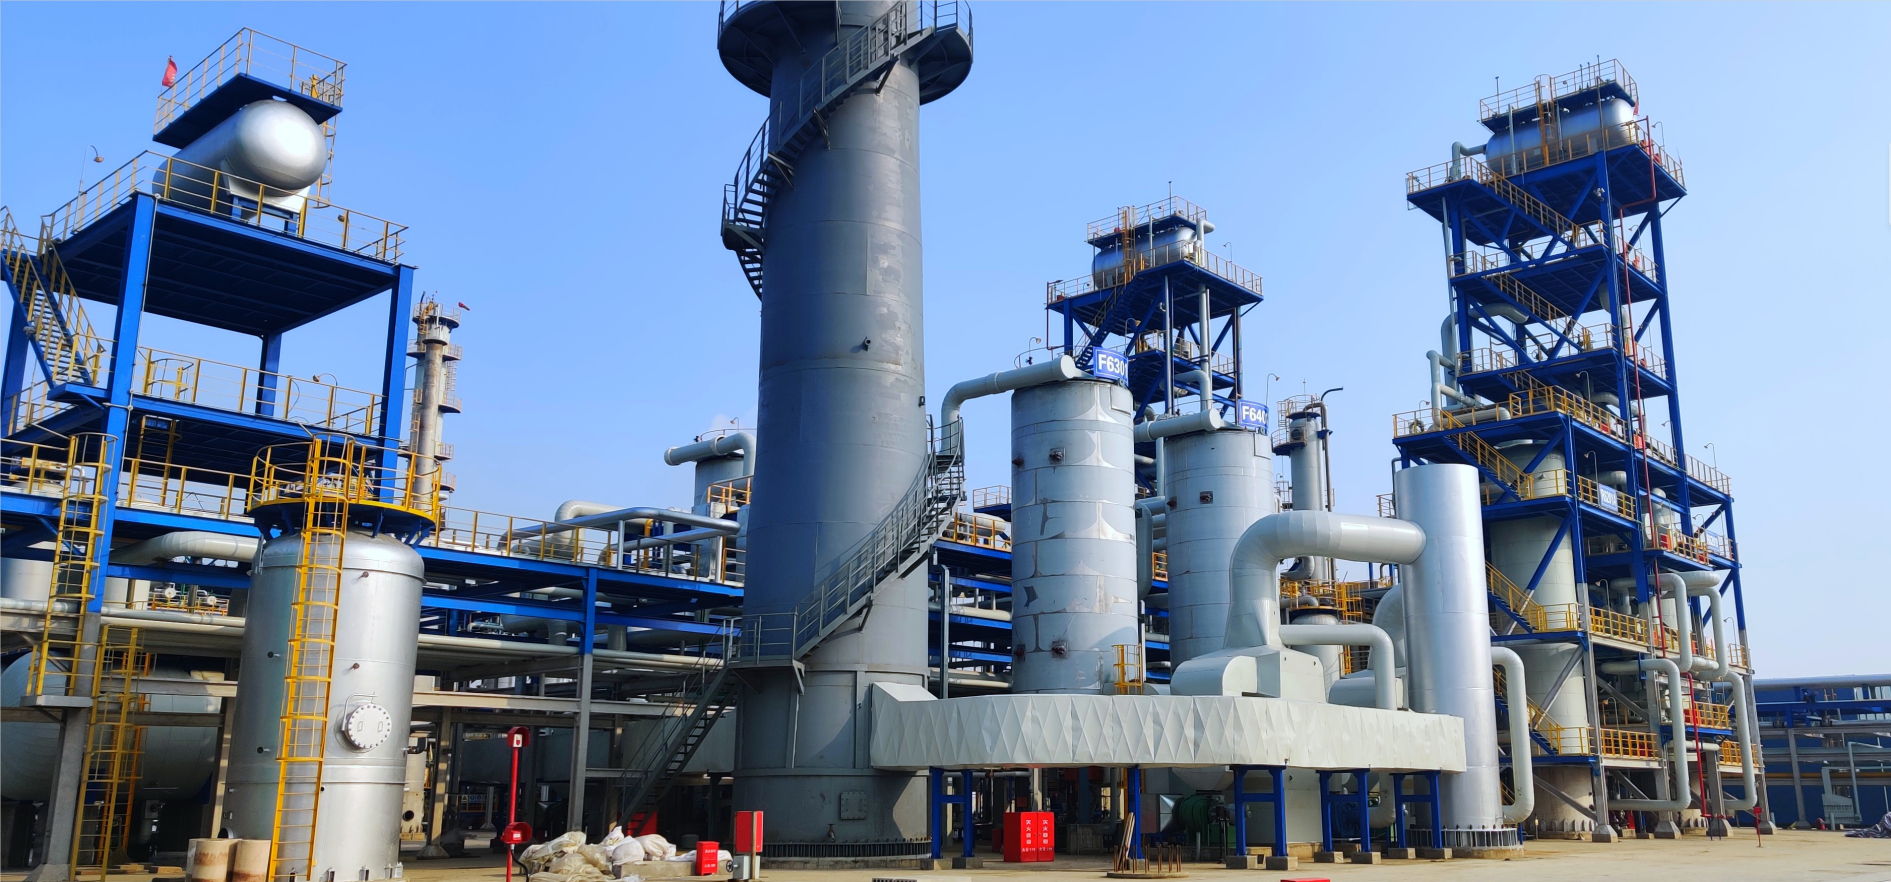 Shandong Dongfang Hualong Industry and Trade Group Co., Ltd. + 60000 methanol hydrogen production unit 1